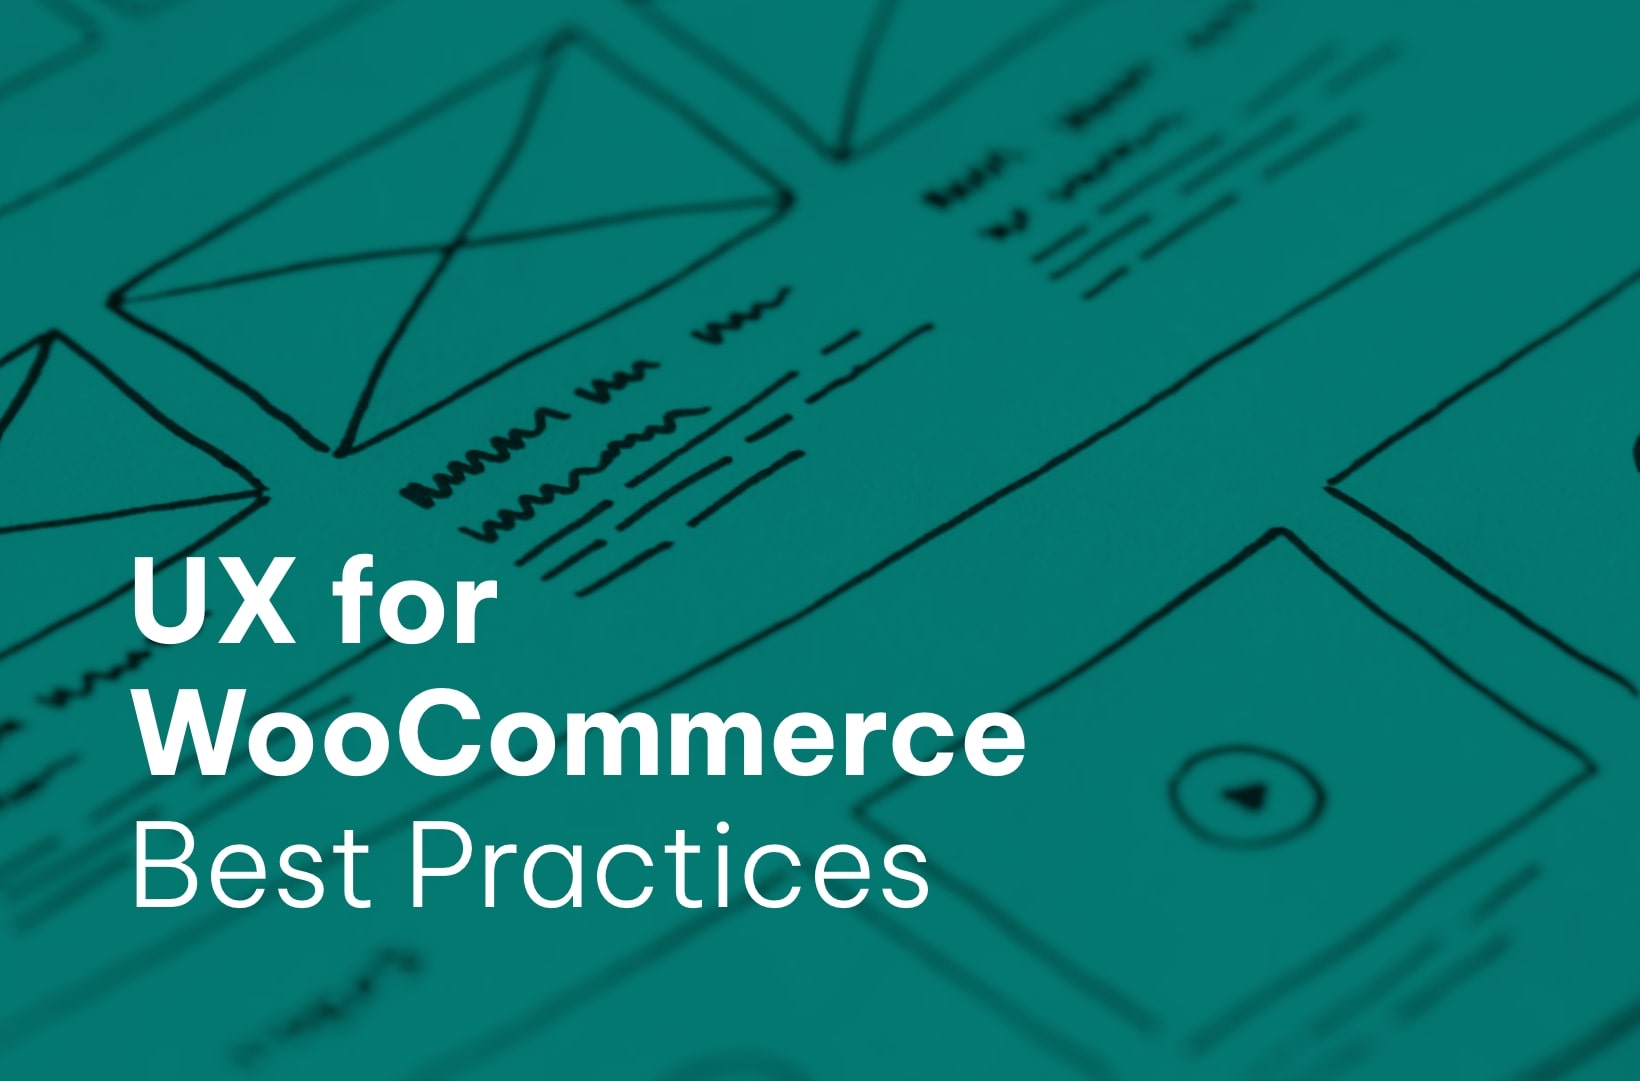 UX for WooCommerce best practices